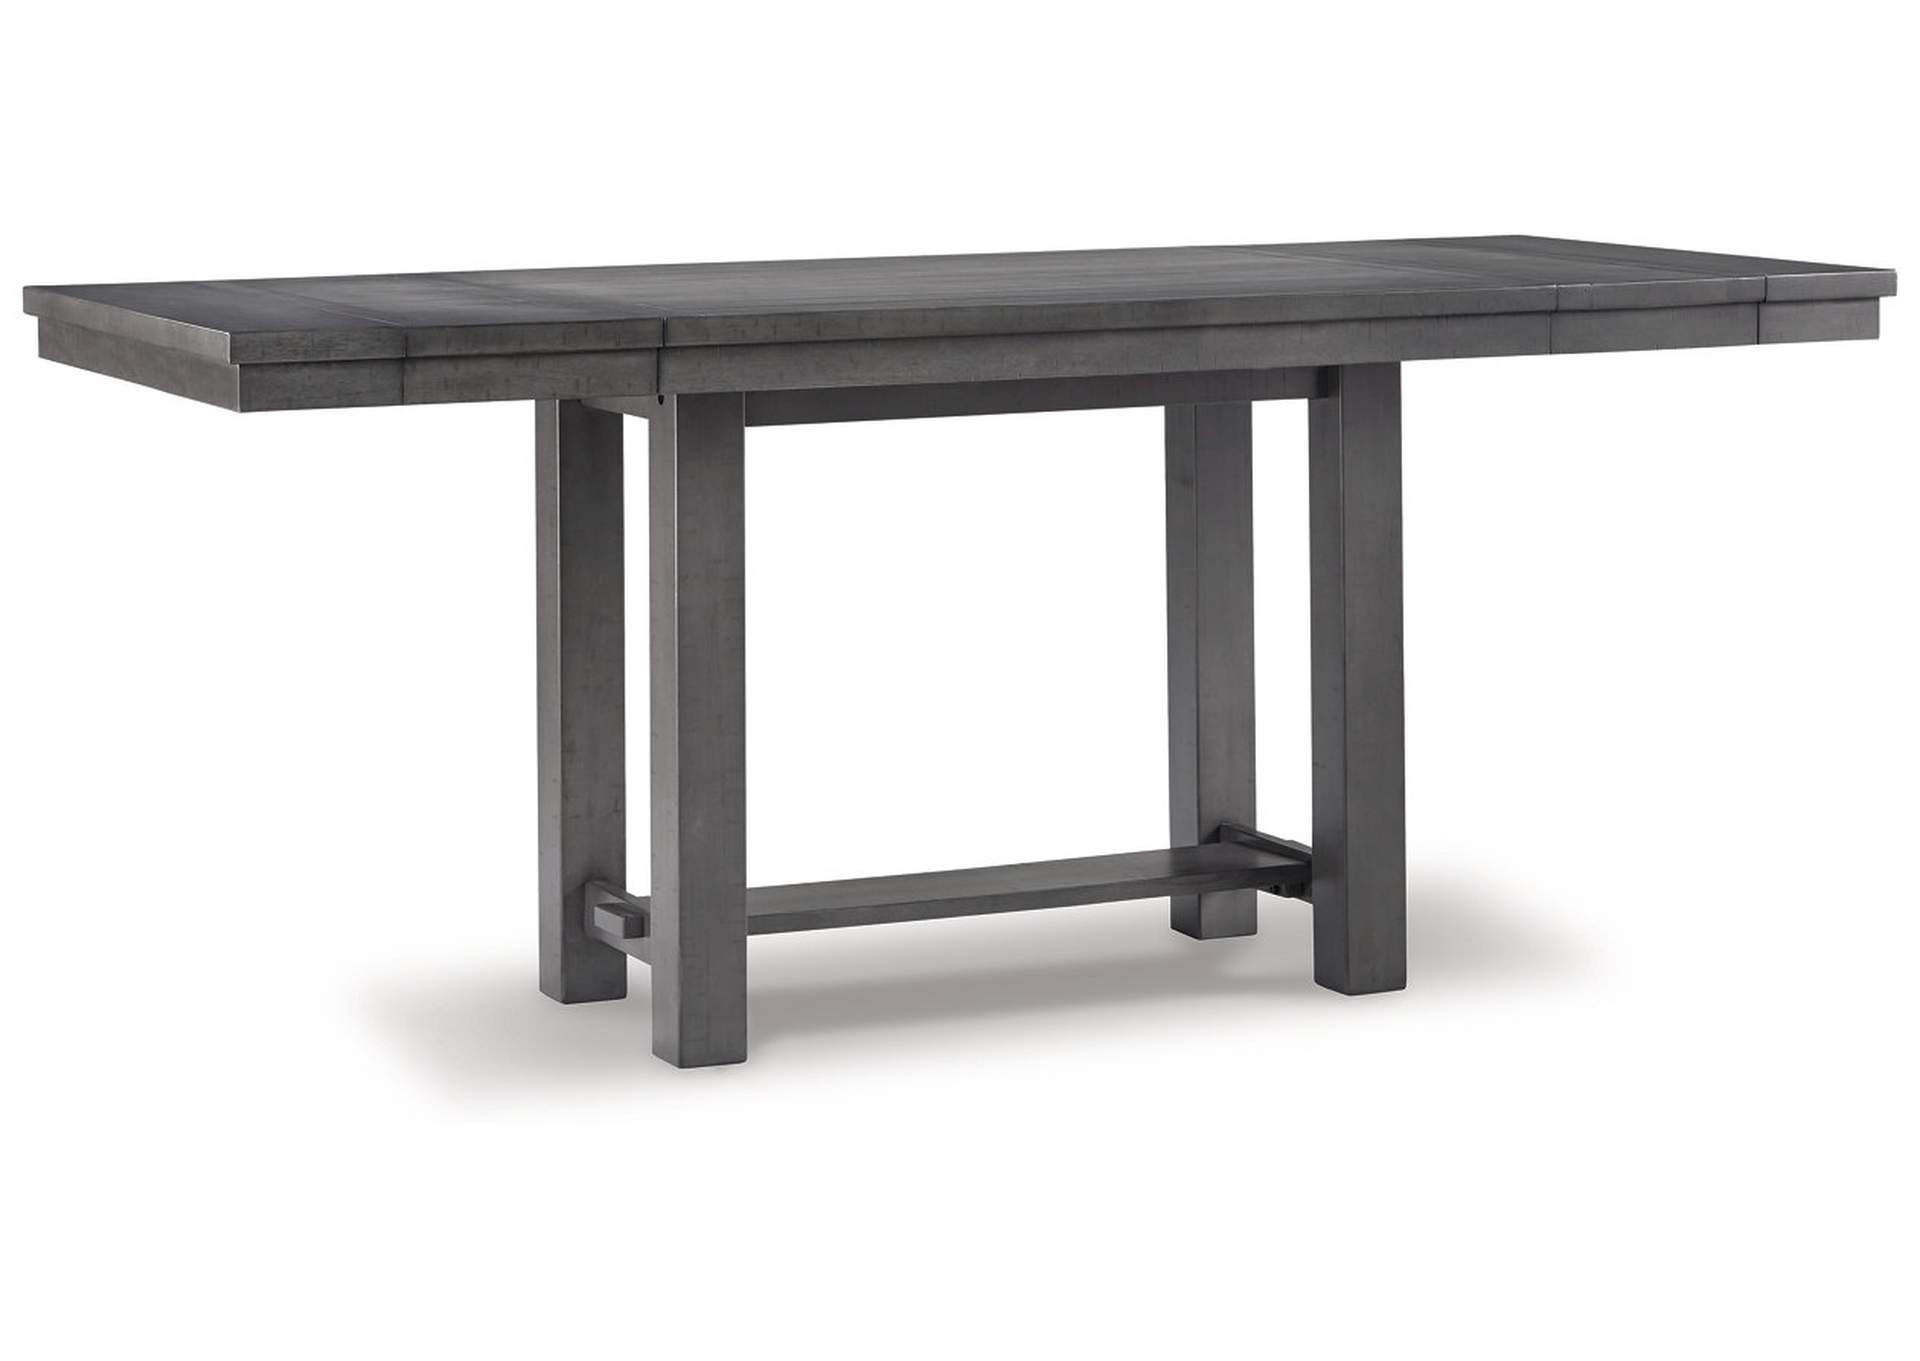 Myshanna Counter Height Dining Table and 6 Barstools,Signature Design By Ashley